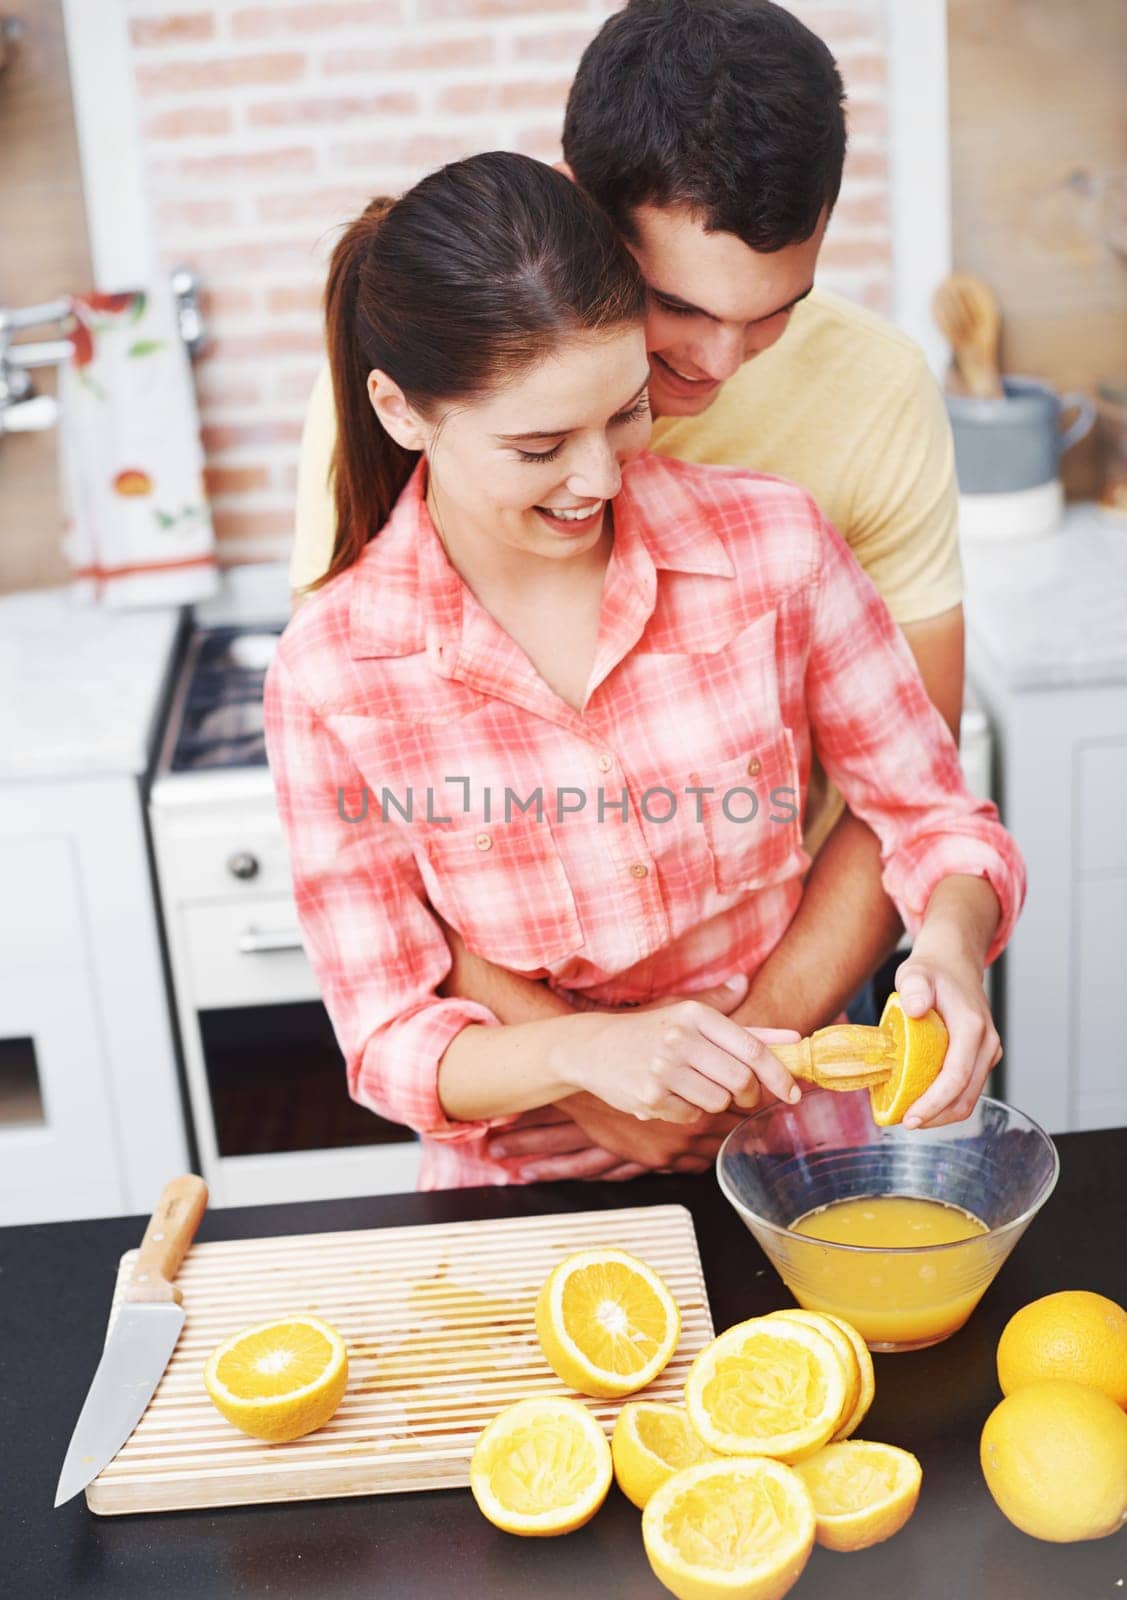 Couple, kitchen and happy with orange for juice in bowl for health, nutrition and diet with ingredients. Home, relationship and bonding with fruit for sweet flavor or lunch snack and fresh food by YuriArcurs